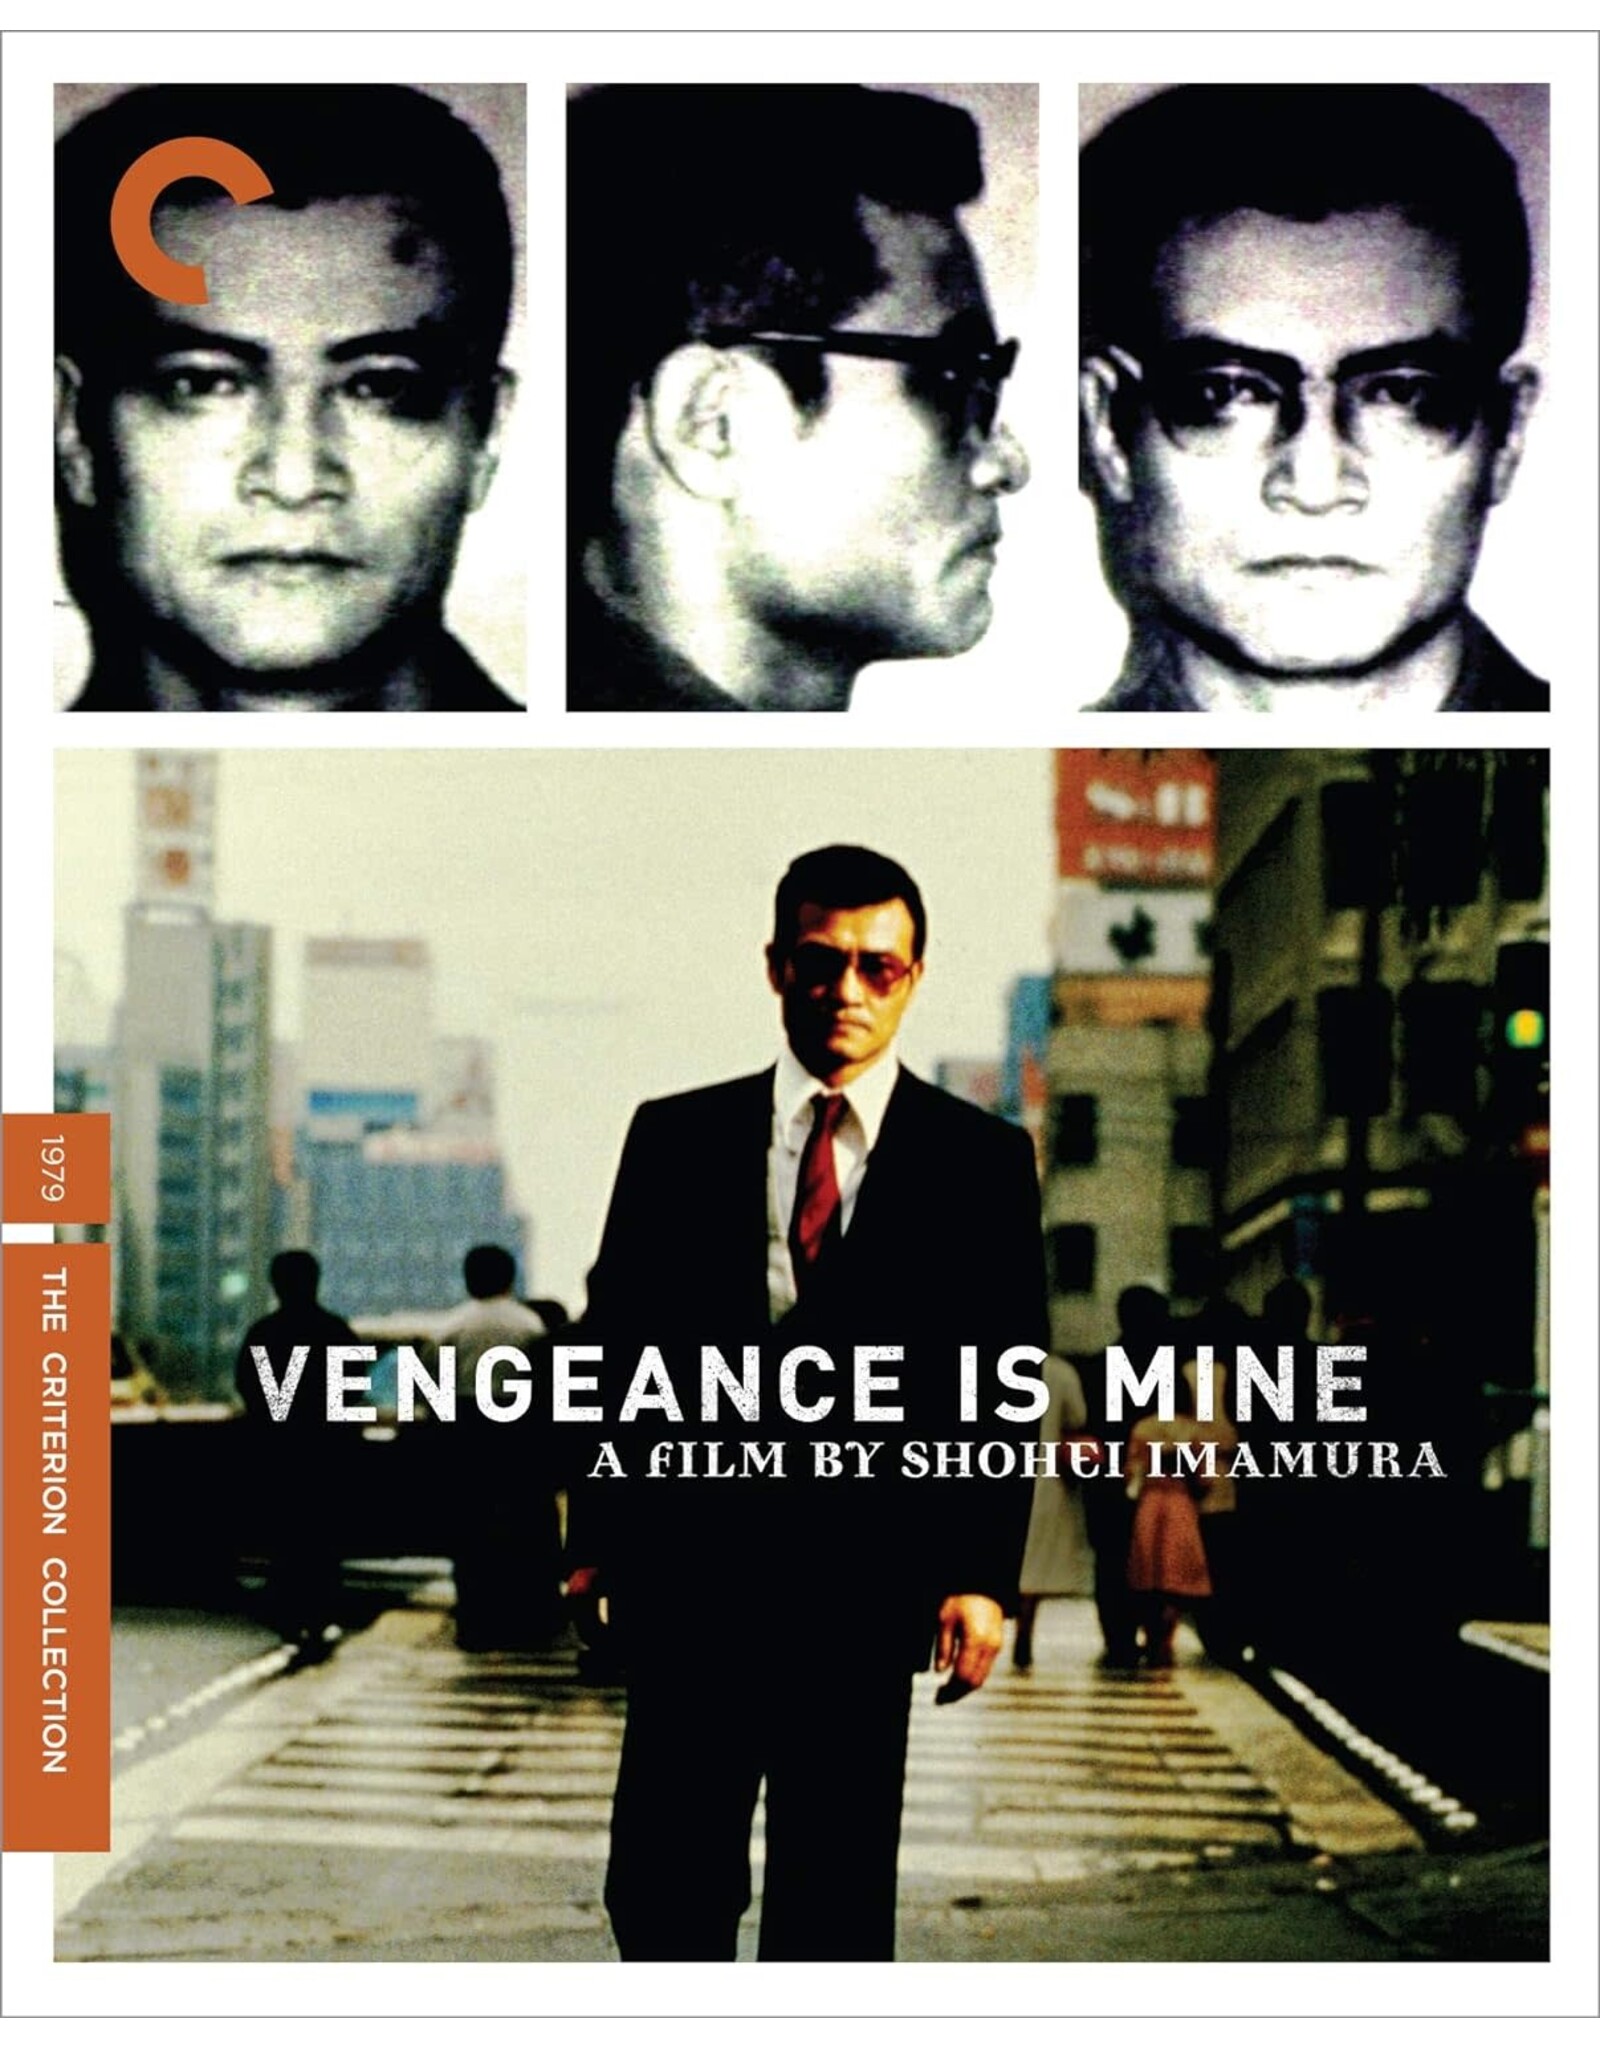 Criterion Collection Vengeance is Mine - Criterion Collection (Used)